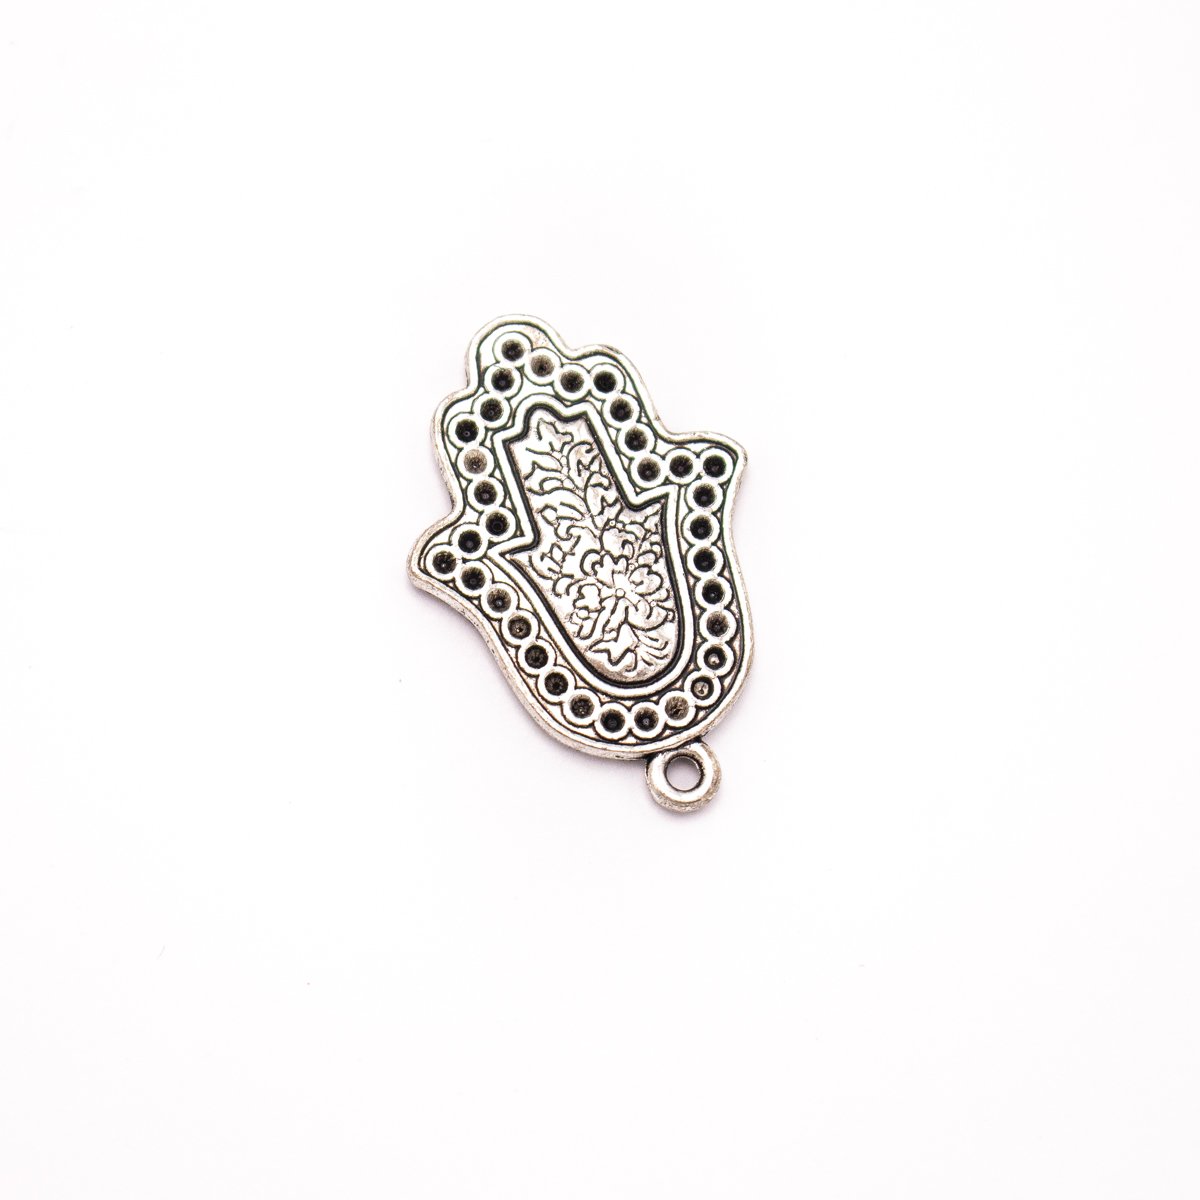 10Pcs s 23mm*35mm Antique Silver Hand of God pendant jewelry supplies jewelry finding D-3-435